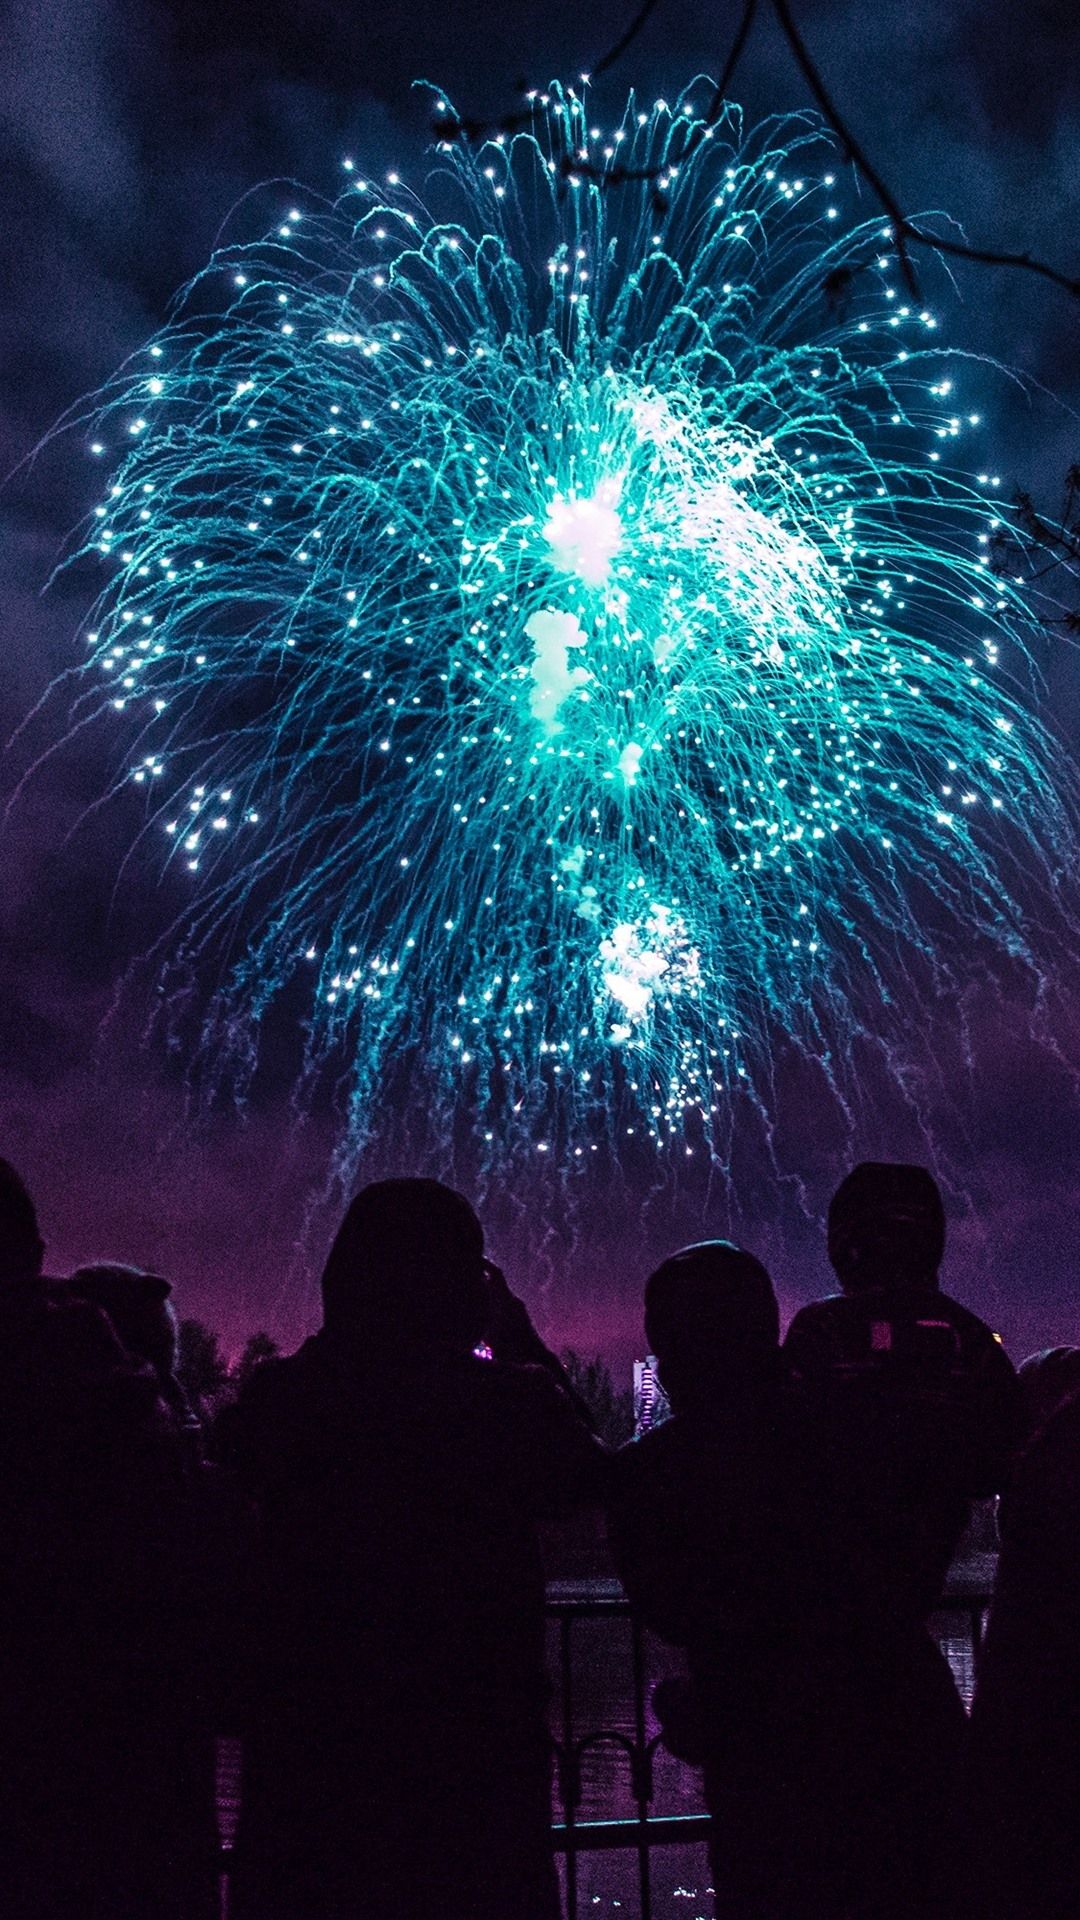 Wallpaper Night, blue fireworks, people, holiday 2880x1800 HD